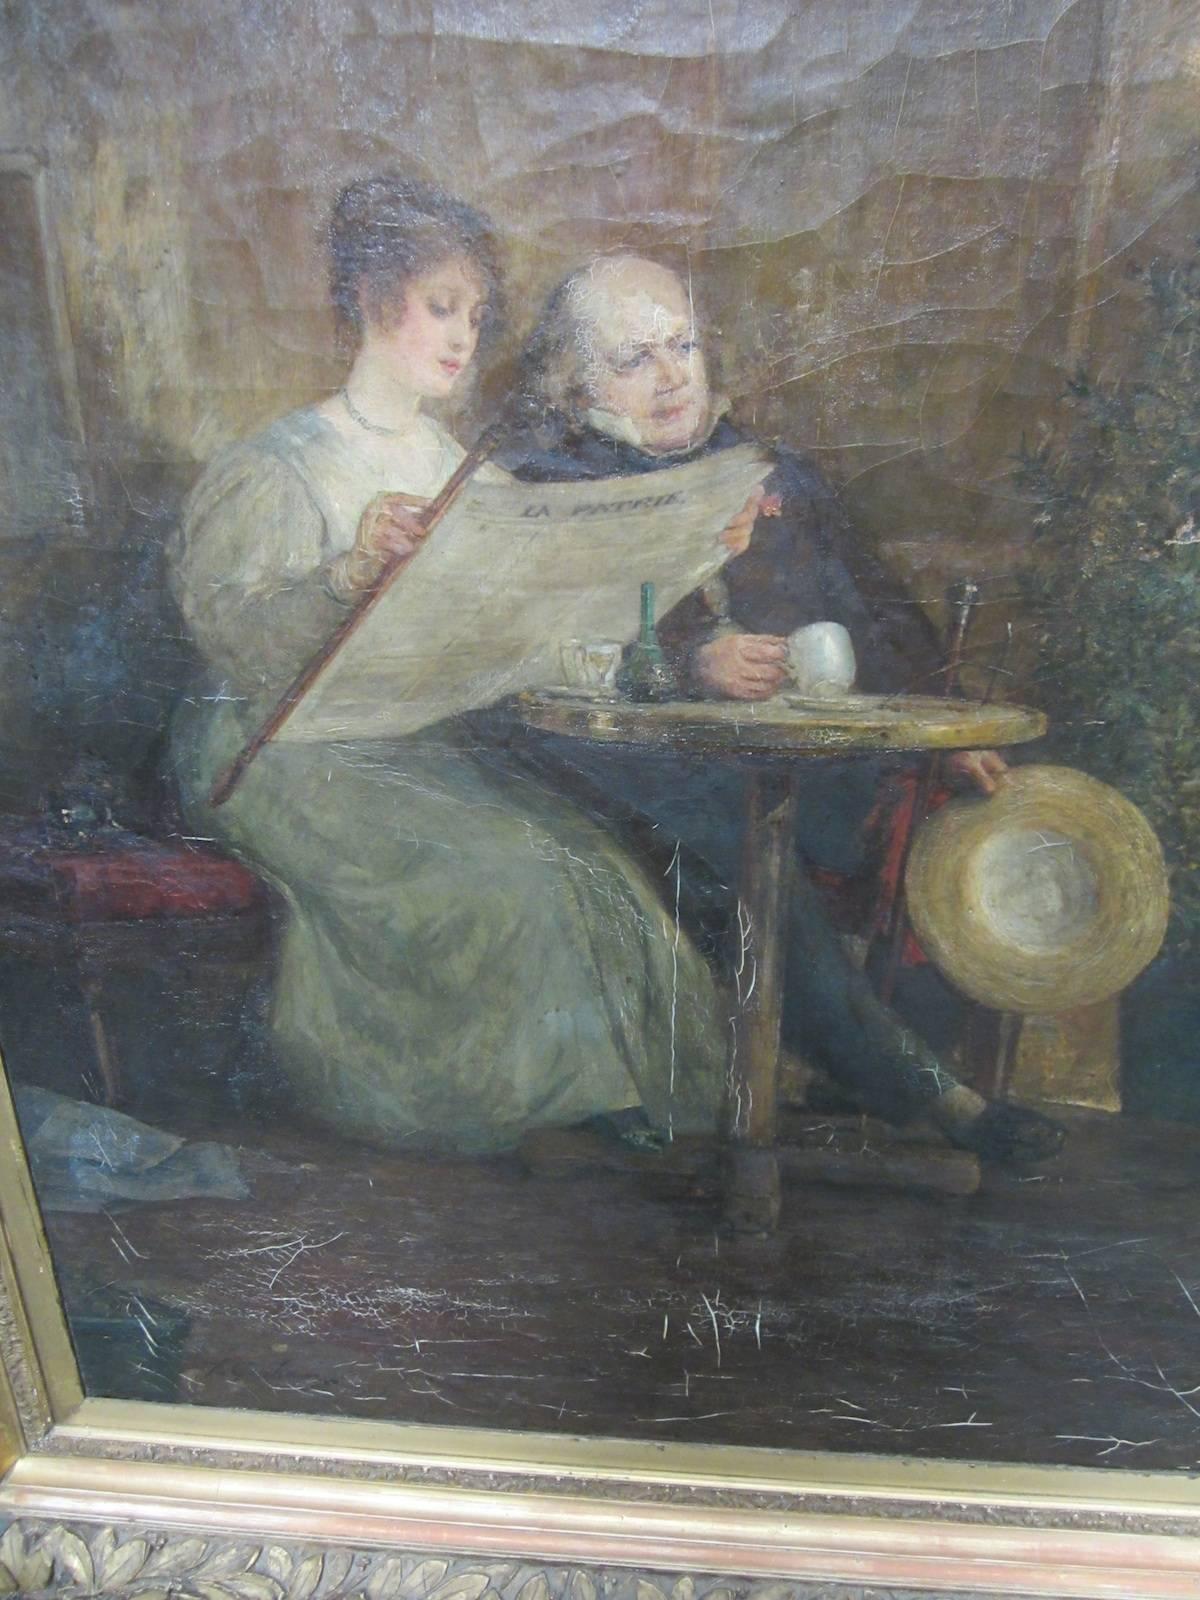 Thomas Alexander Graham (Scotland) 1840-1906,
Young woman and man reading (La Patrie),
Oil on canvas, in need of restoration,
image 100 x 127, frame 140 x 167cm.
Has a 2005 Valuation for AUS$8,000,
Would make an excellent mirror.